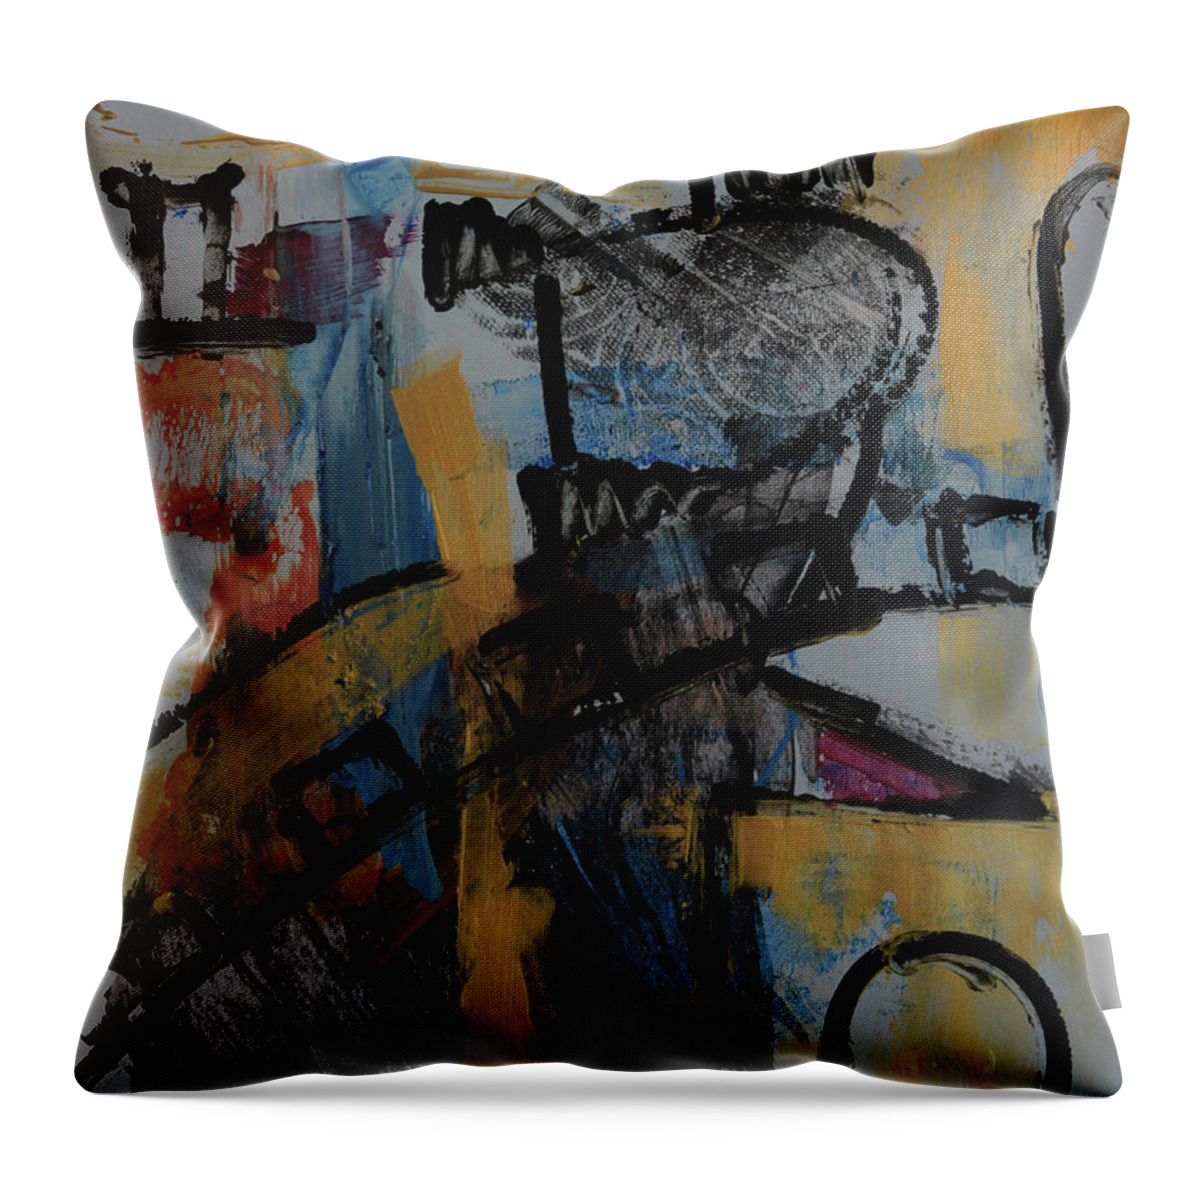 Abstract Throw Pillow featuring the painting Composition 20185 by Walter Fahmy